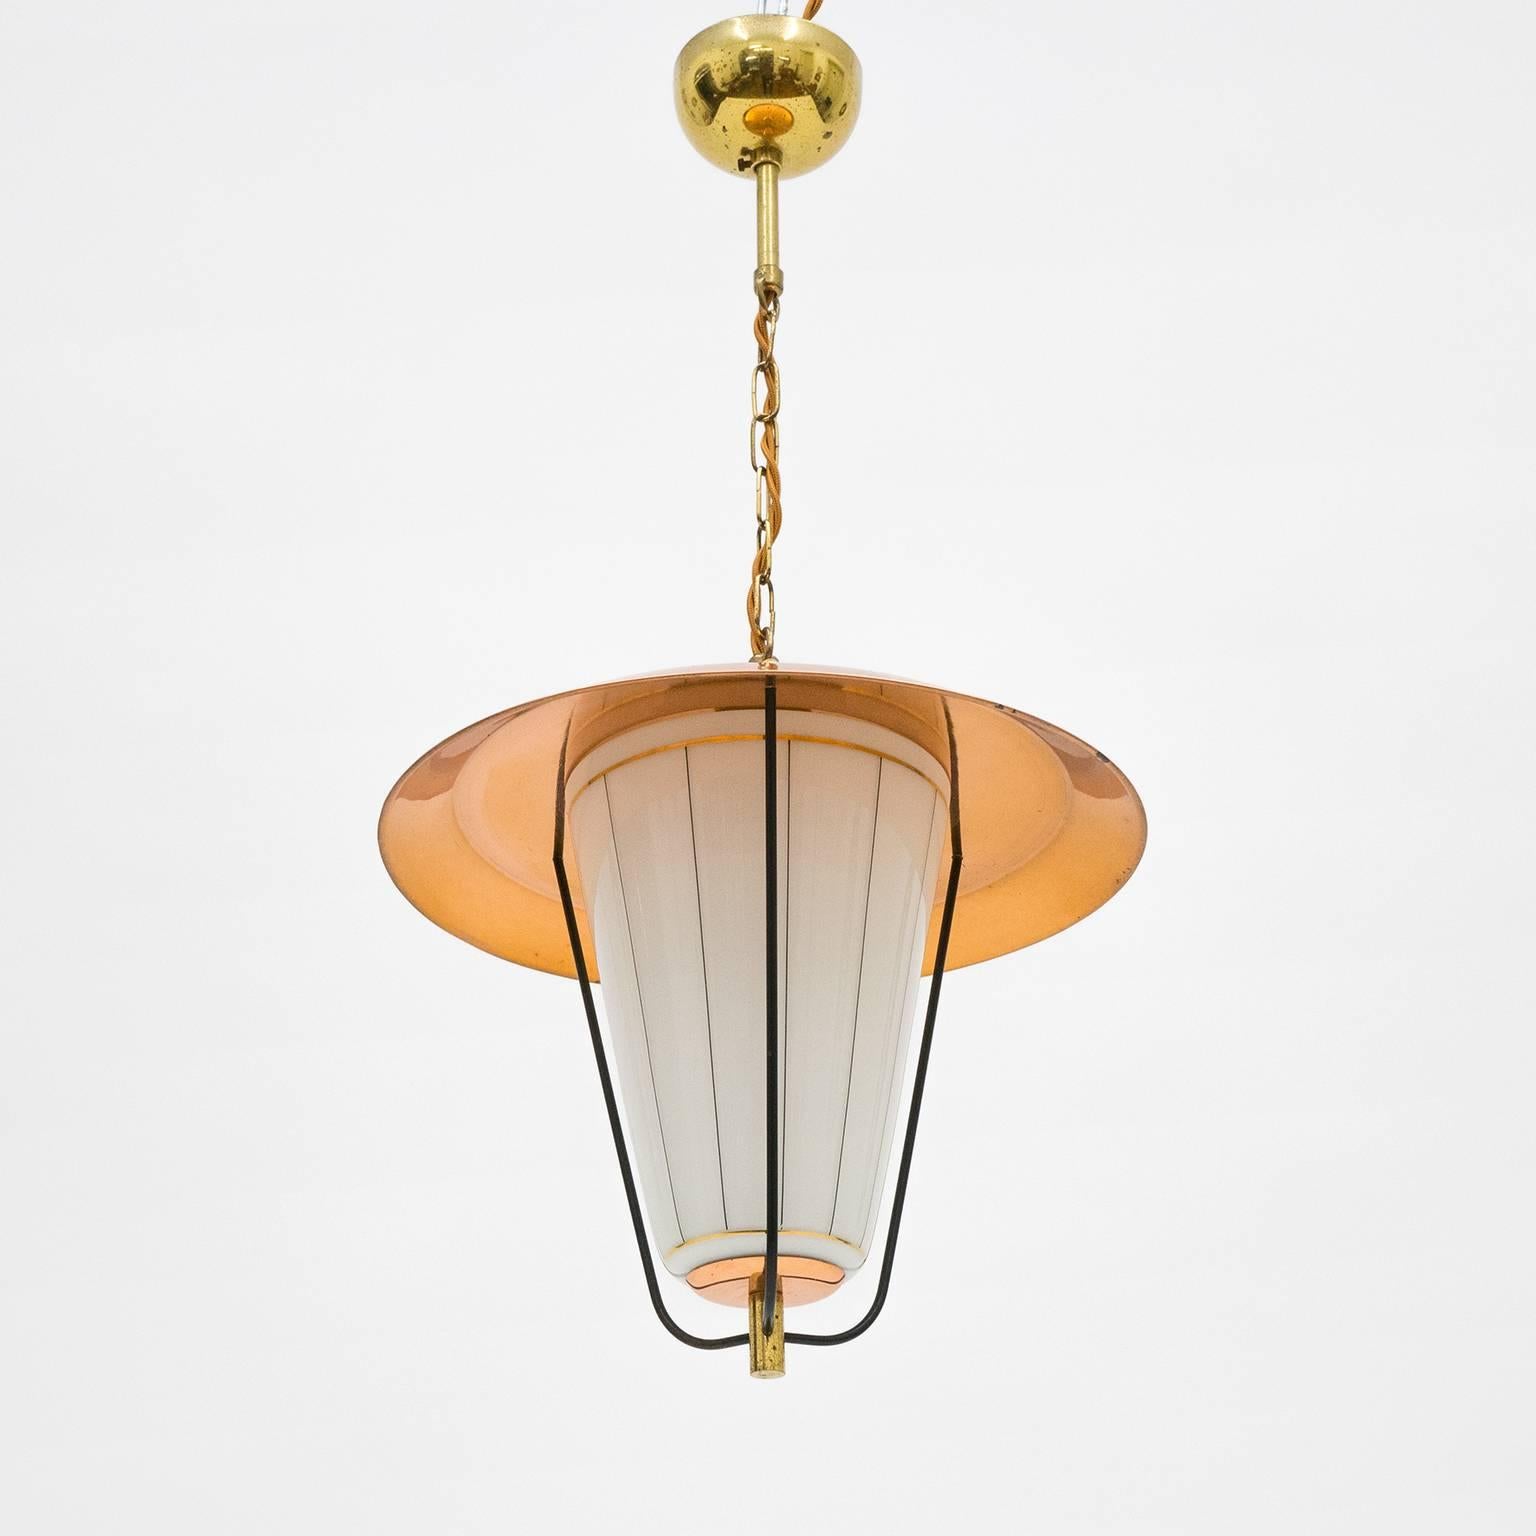 Lovely Mid-Century lantern pendant from Austria, 1950s. Subtle mix of colors and materials with brass, a copper shade and an opaline glass diffuser with black and gold pinstripe decor - has a nice 'Modernist meets Art Deco' attitude to it. Very nice